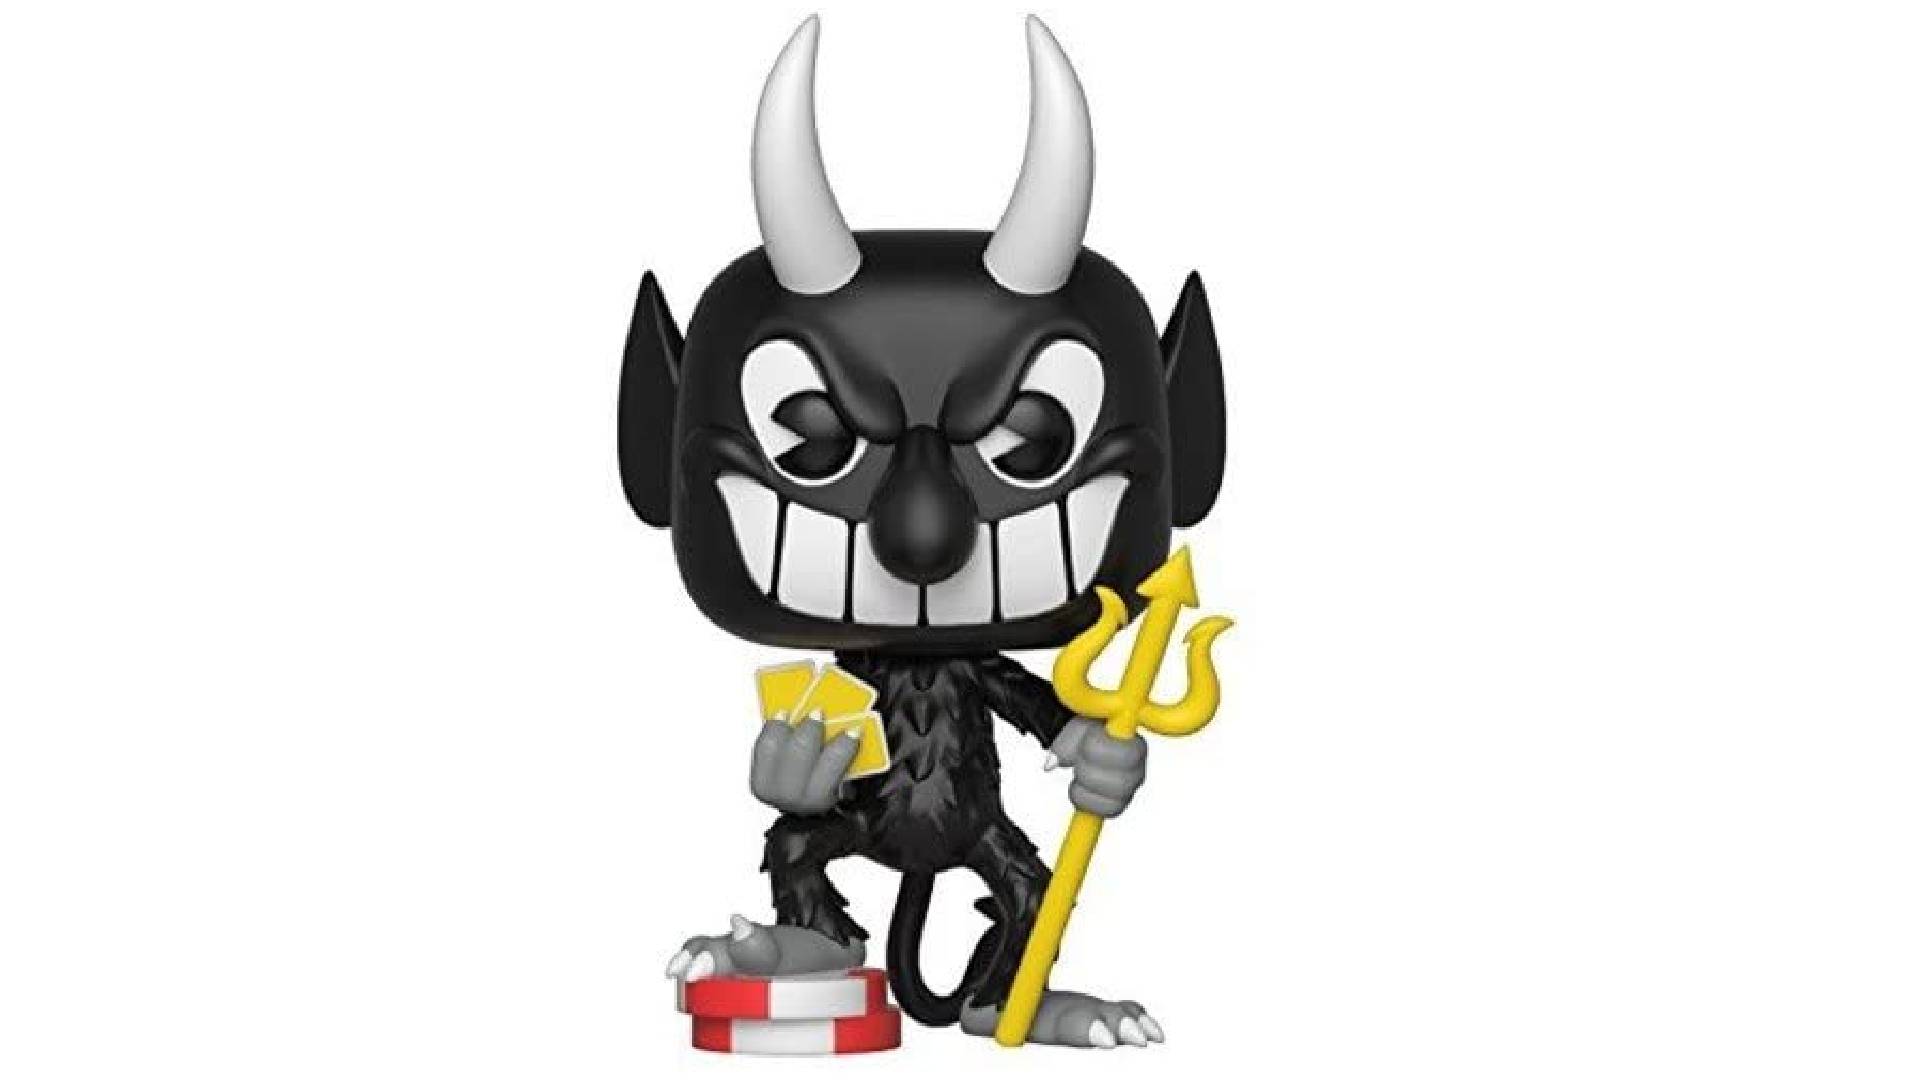 Cuphead Funko Pop: A product image shows a Funko Pop figure of The Devil from Cuphead 